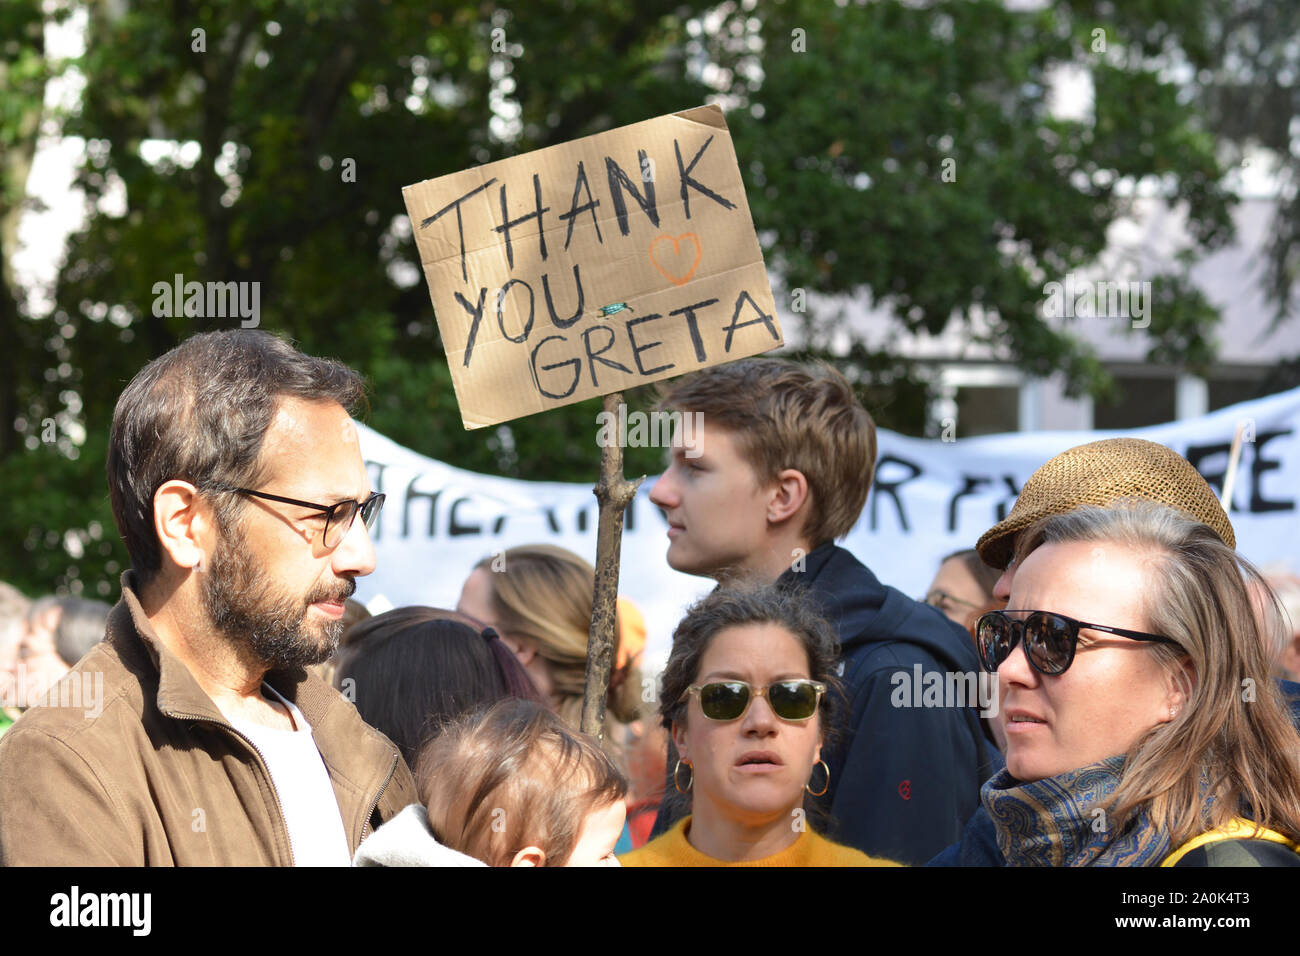 Heidelberg, Germany: Demonstration during Global Climate Strike with cardboard banner  saying 'Thank you Greta' Stock Photo